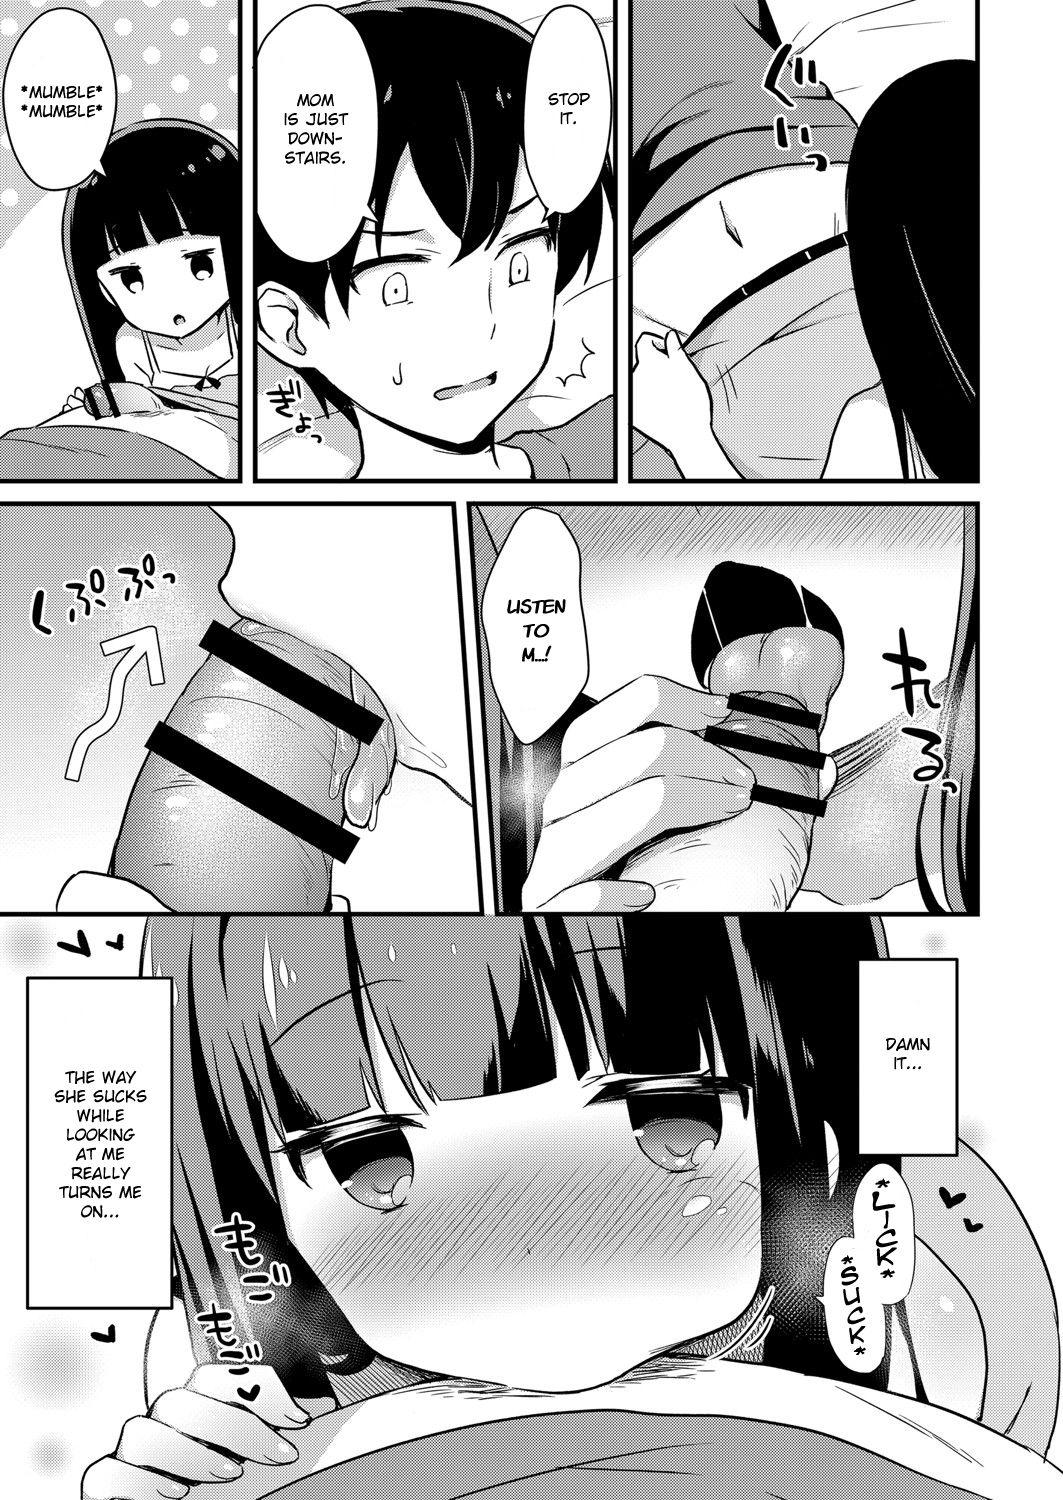 Oral Porn [Tiger] Yuuwaku・Imouto #2 Onii-chan wa seishori gakari | Little Sister Temptation #2 Onii-chan is in Charge of My Libido Management (COMIC Reboot Vol. 07) [English] [Digital] Head - Page 9